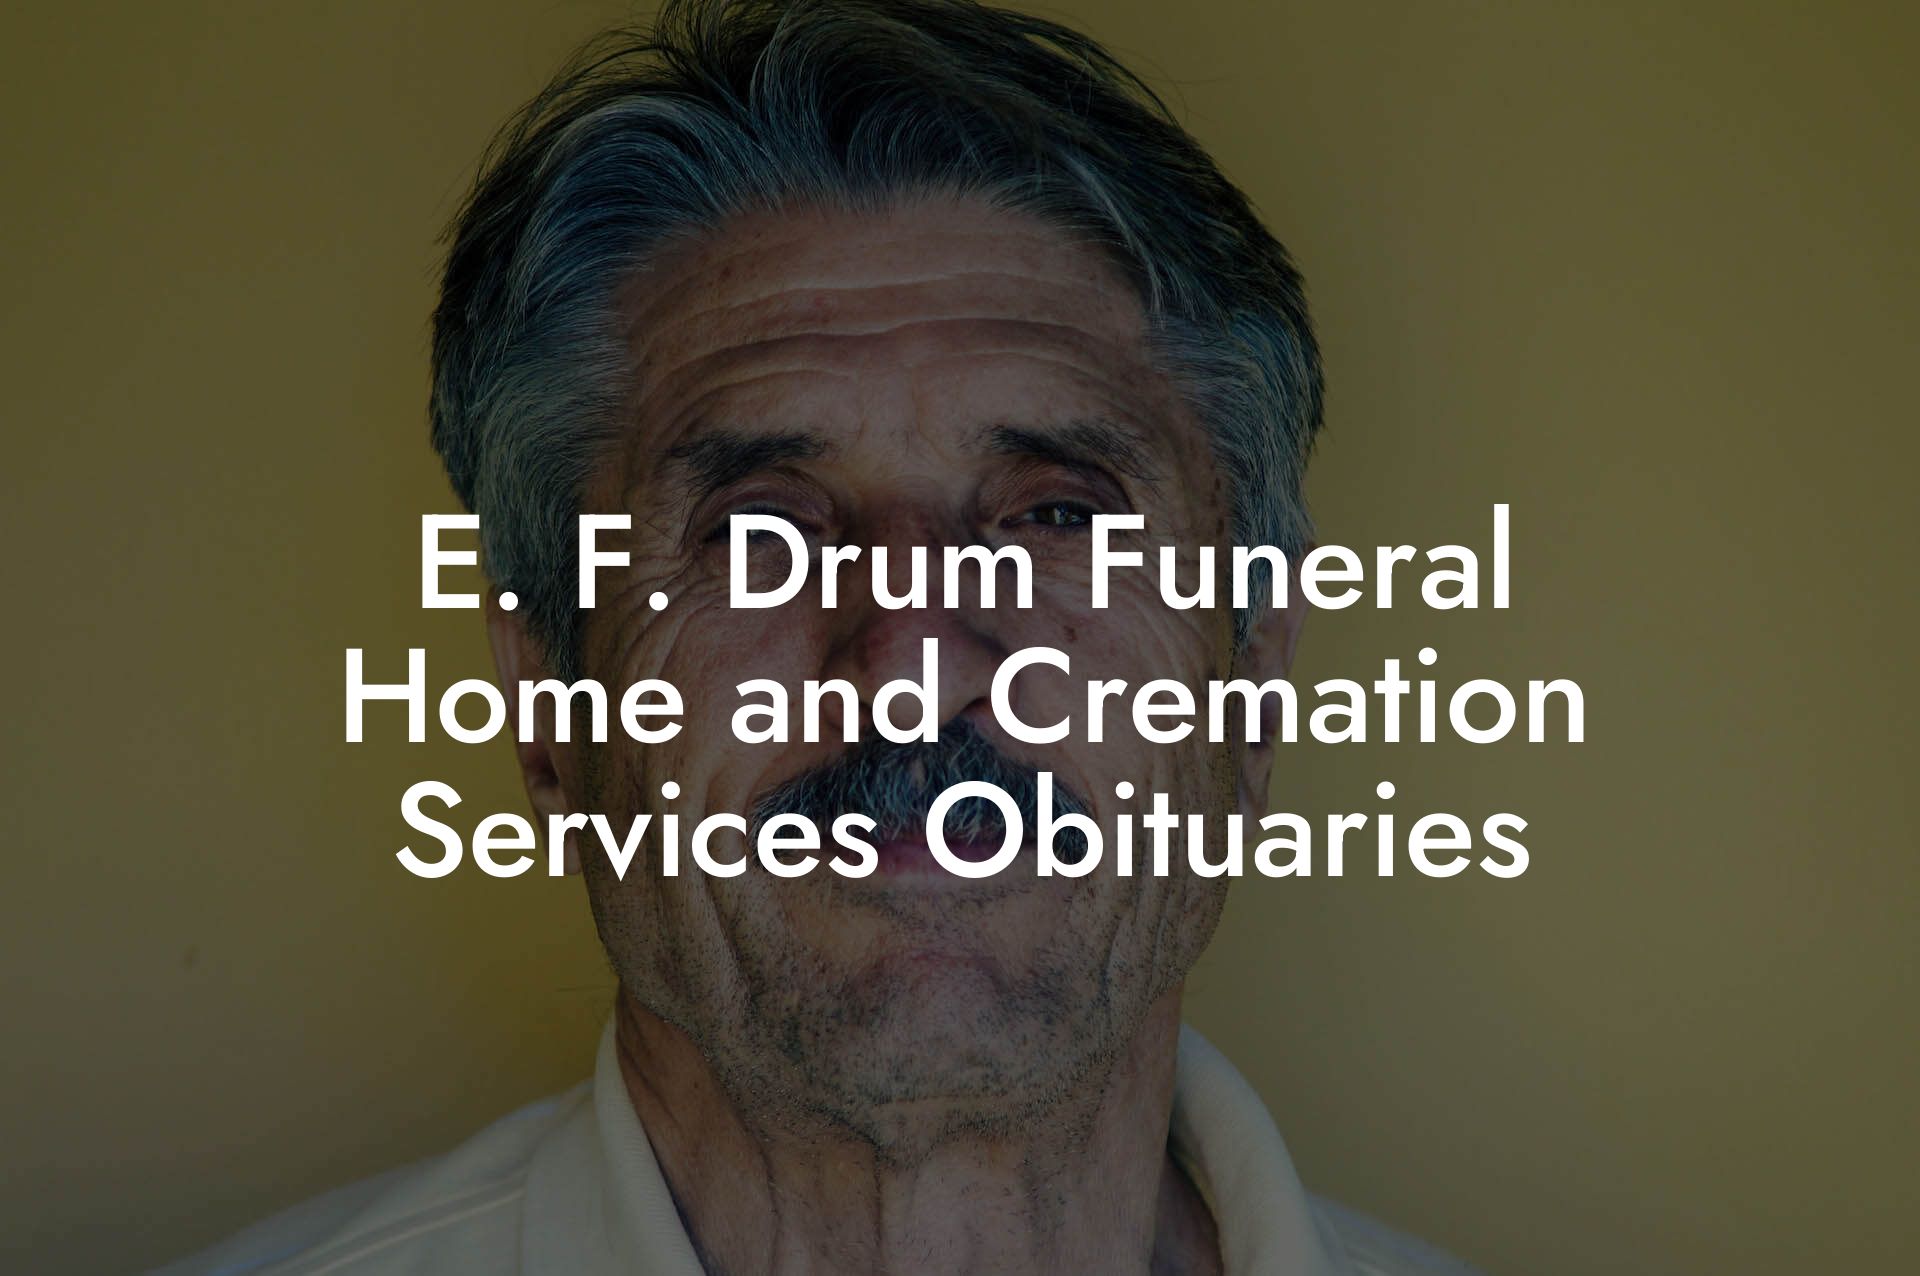 E. F. Drum Funeral Home and Cremation Services Obituaries